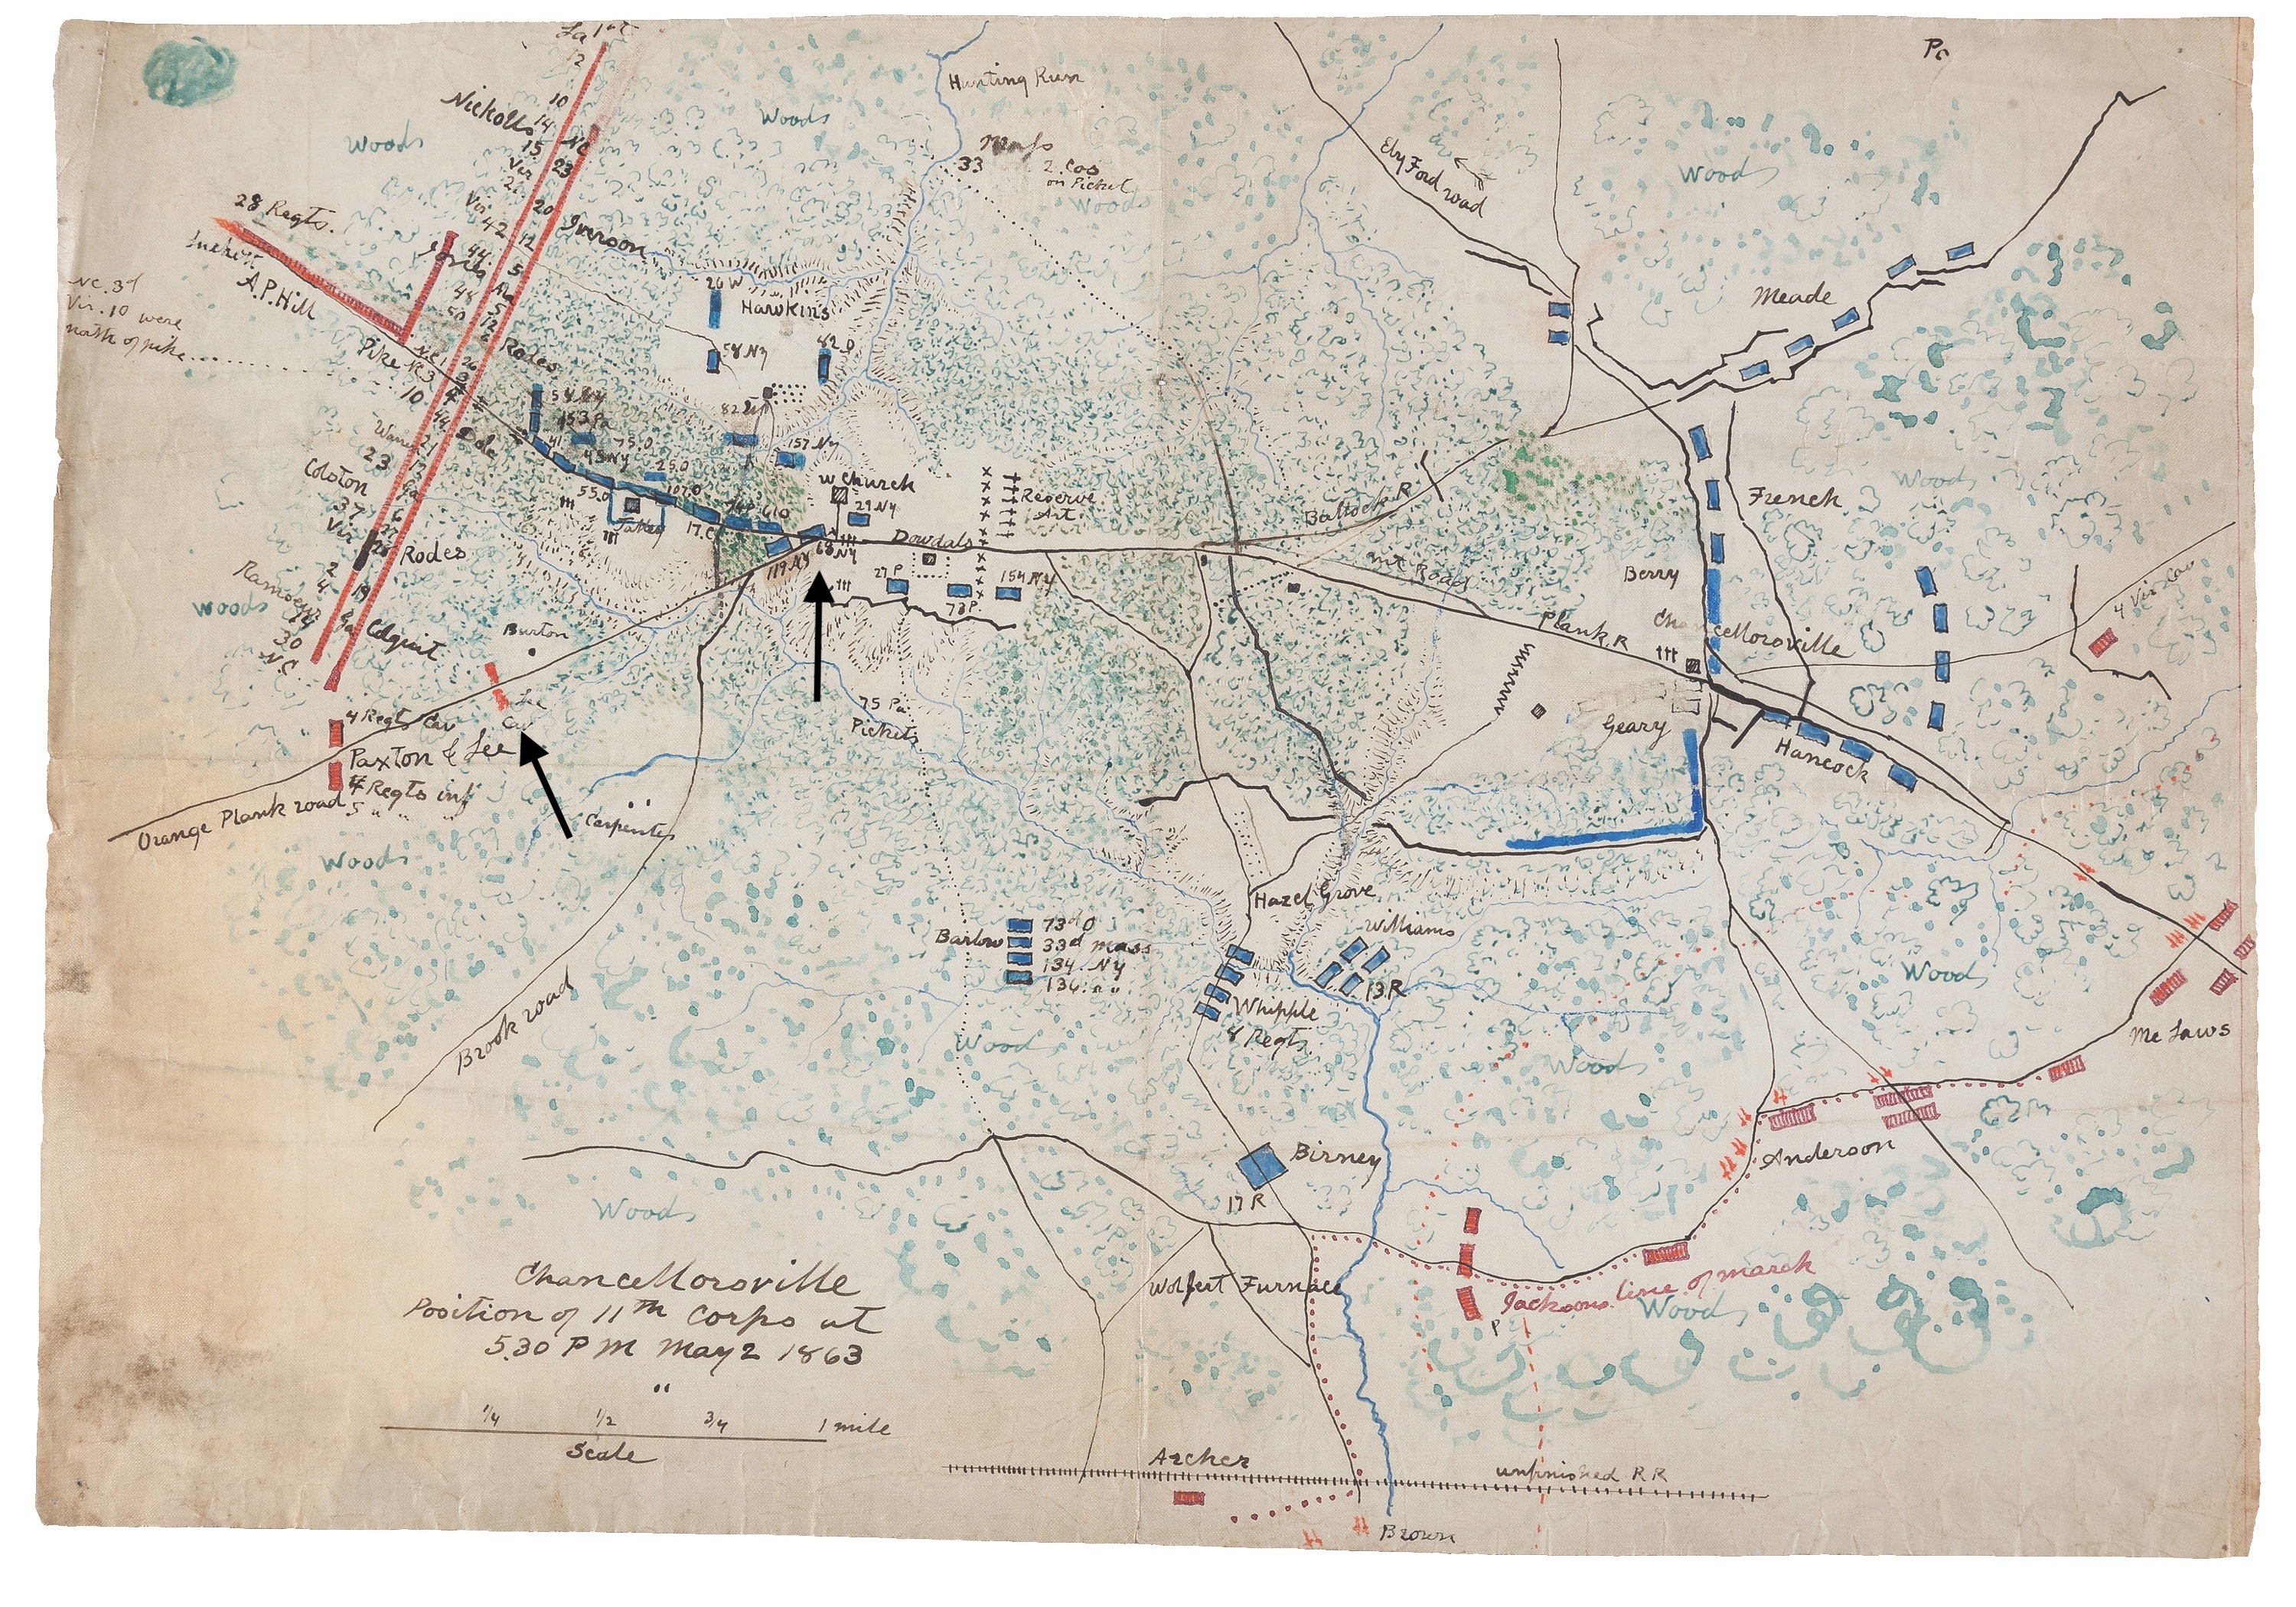 May 2, 1863 Von Fritsch’s bad day at Chancellorsville began when he left the location of the 68th New York at the intersection of the Orange Plank Road and the Orange Turnpike, circled, and headed southwest. He ran into Confederate cavalry pickets, also circled, and had to quickly turn around and spur his horse for the safety of his own lines. (Library of Congress)